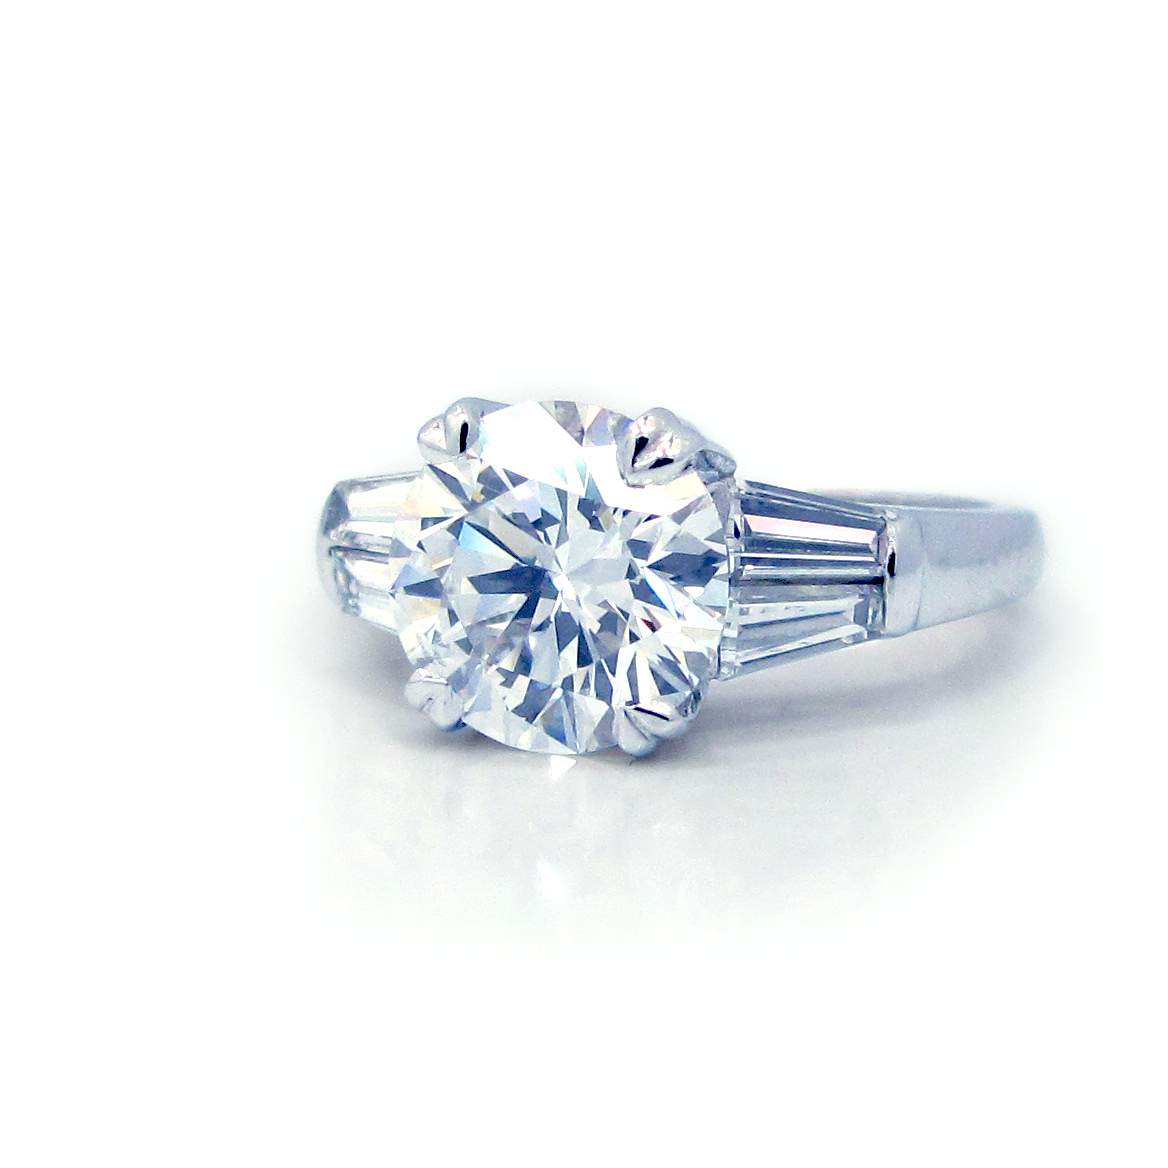 This is a picture of a Double Tapered Baguette Diamond Engagement Setting